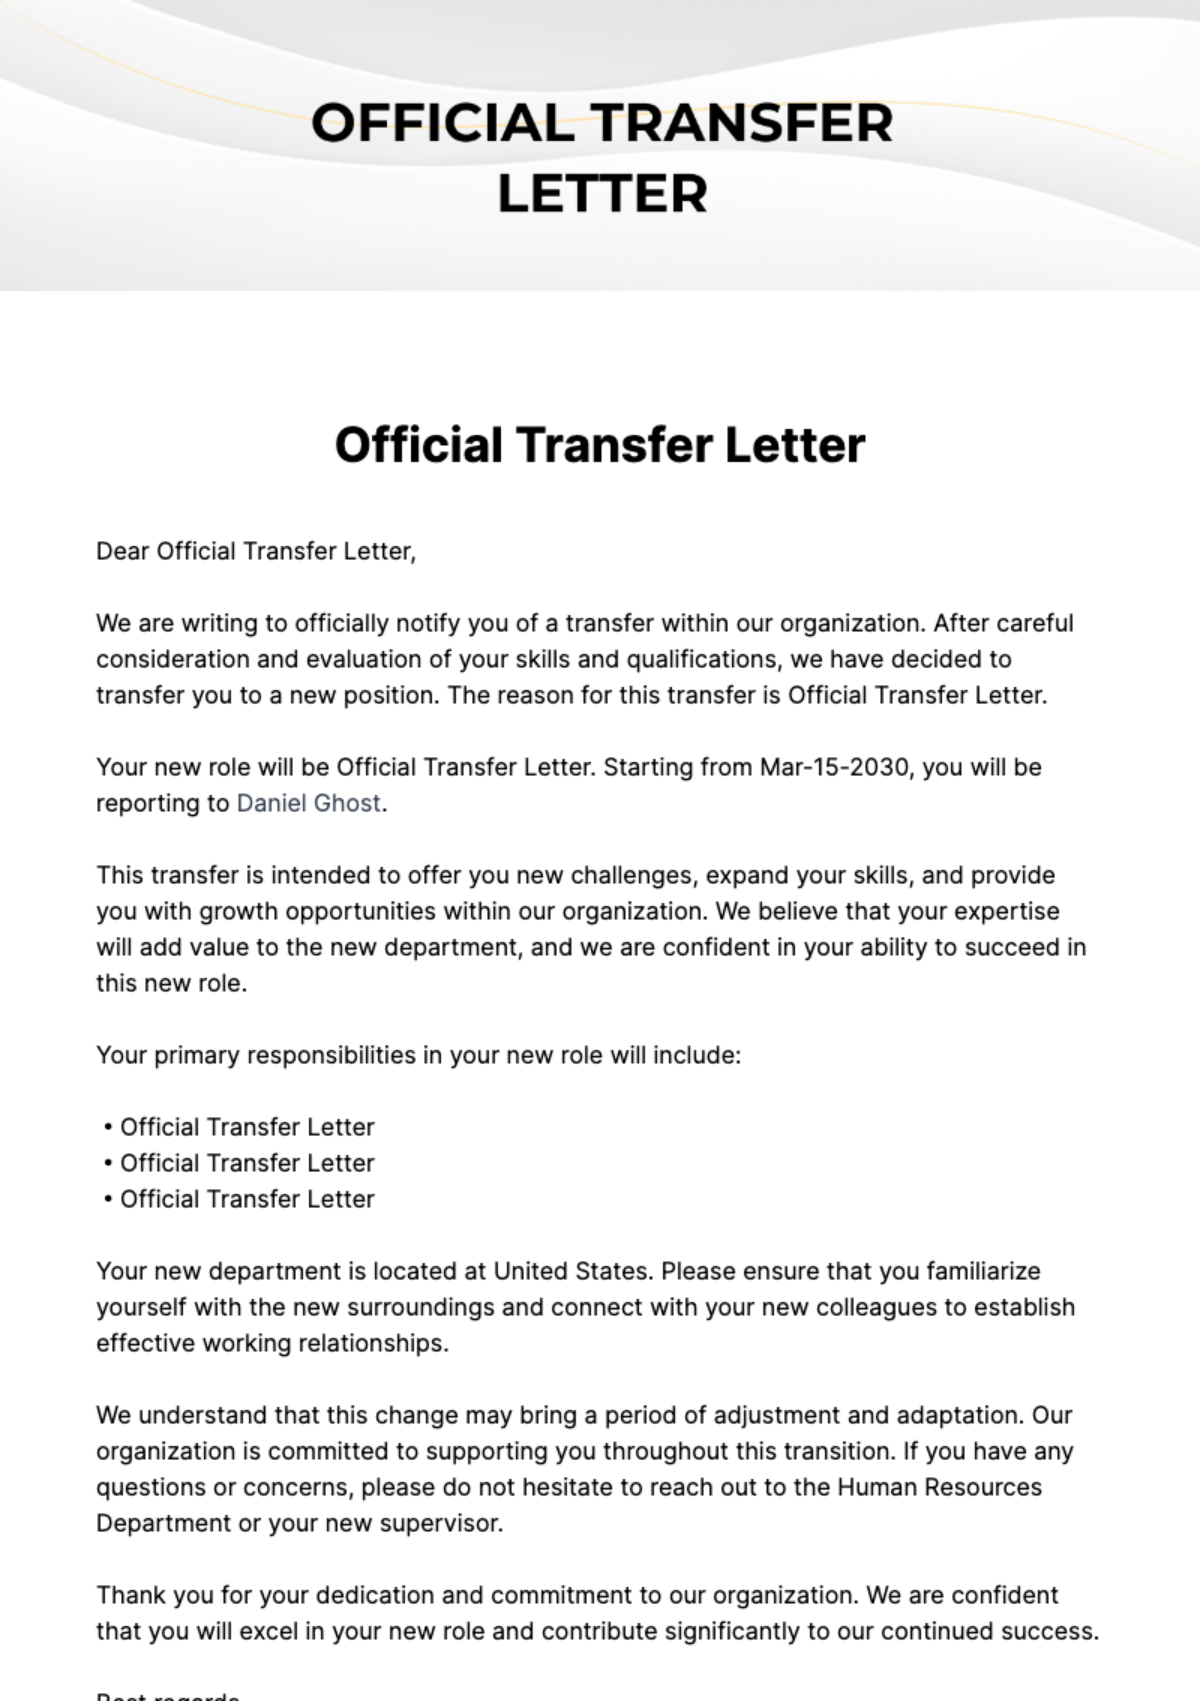 Free Official Transfer Letter Template